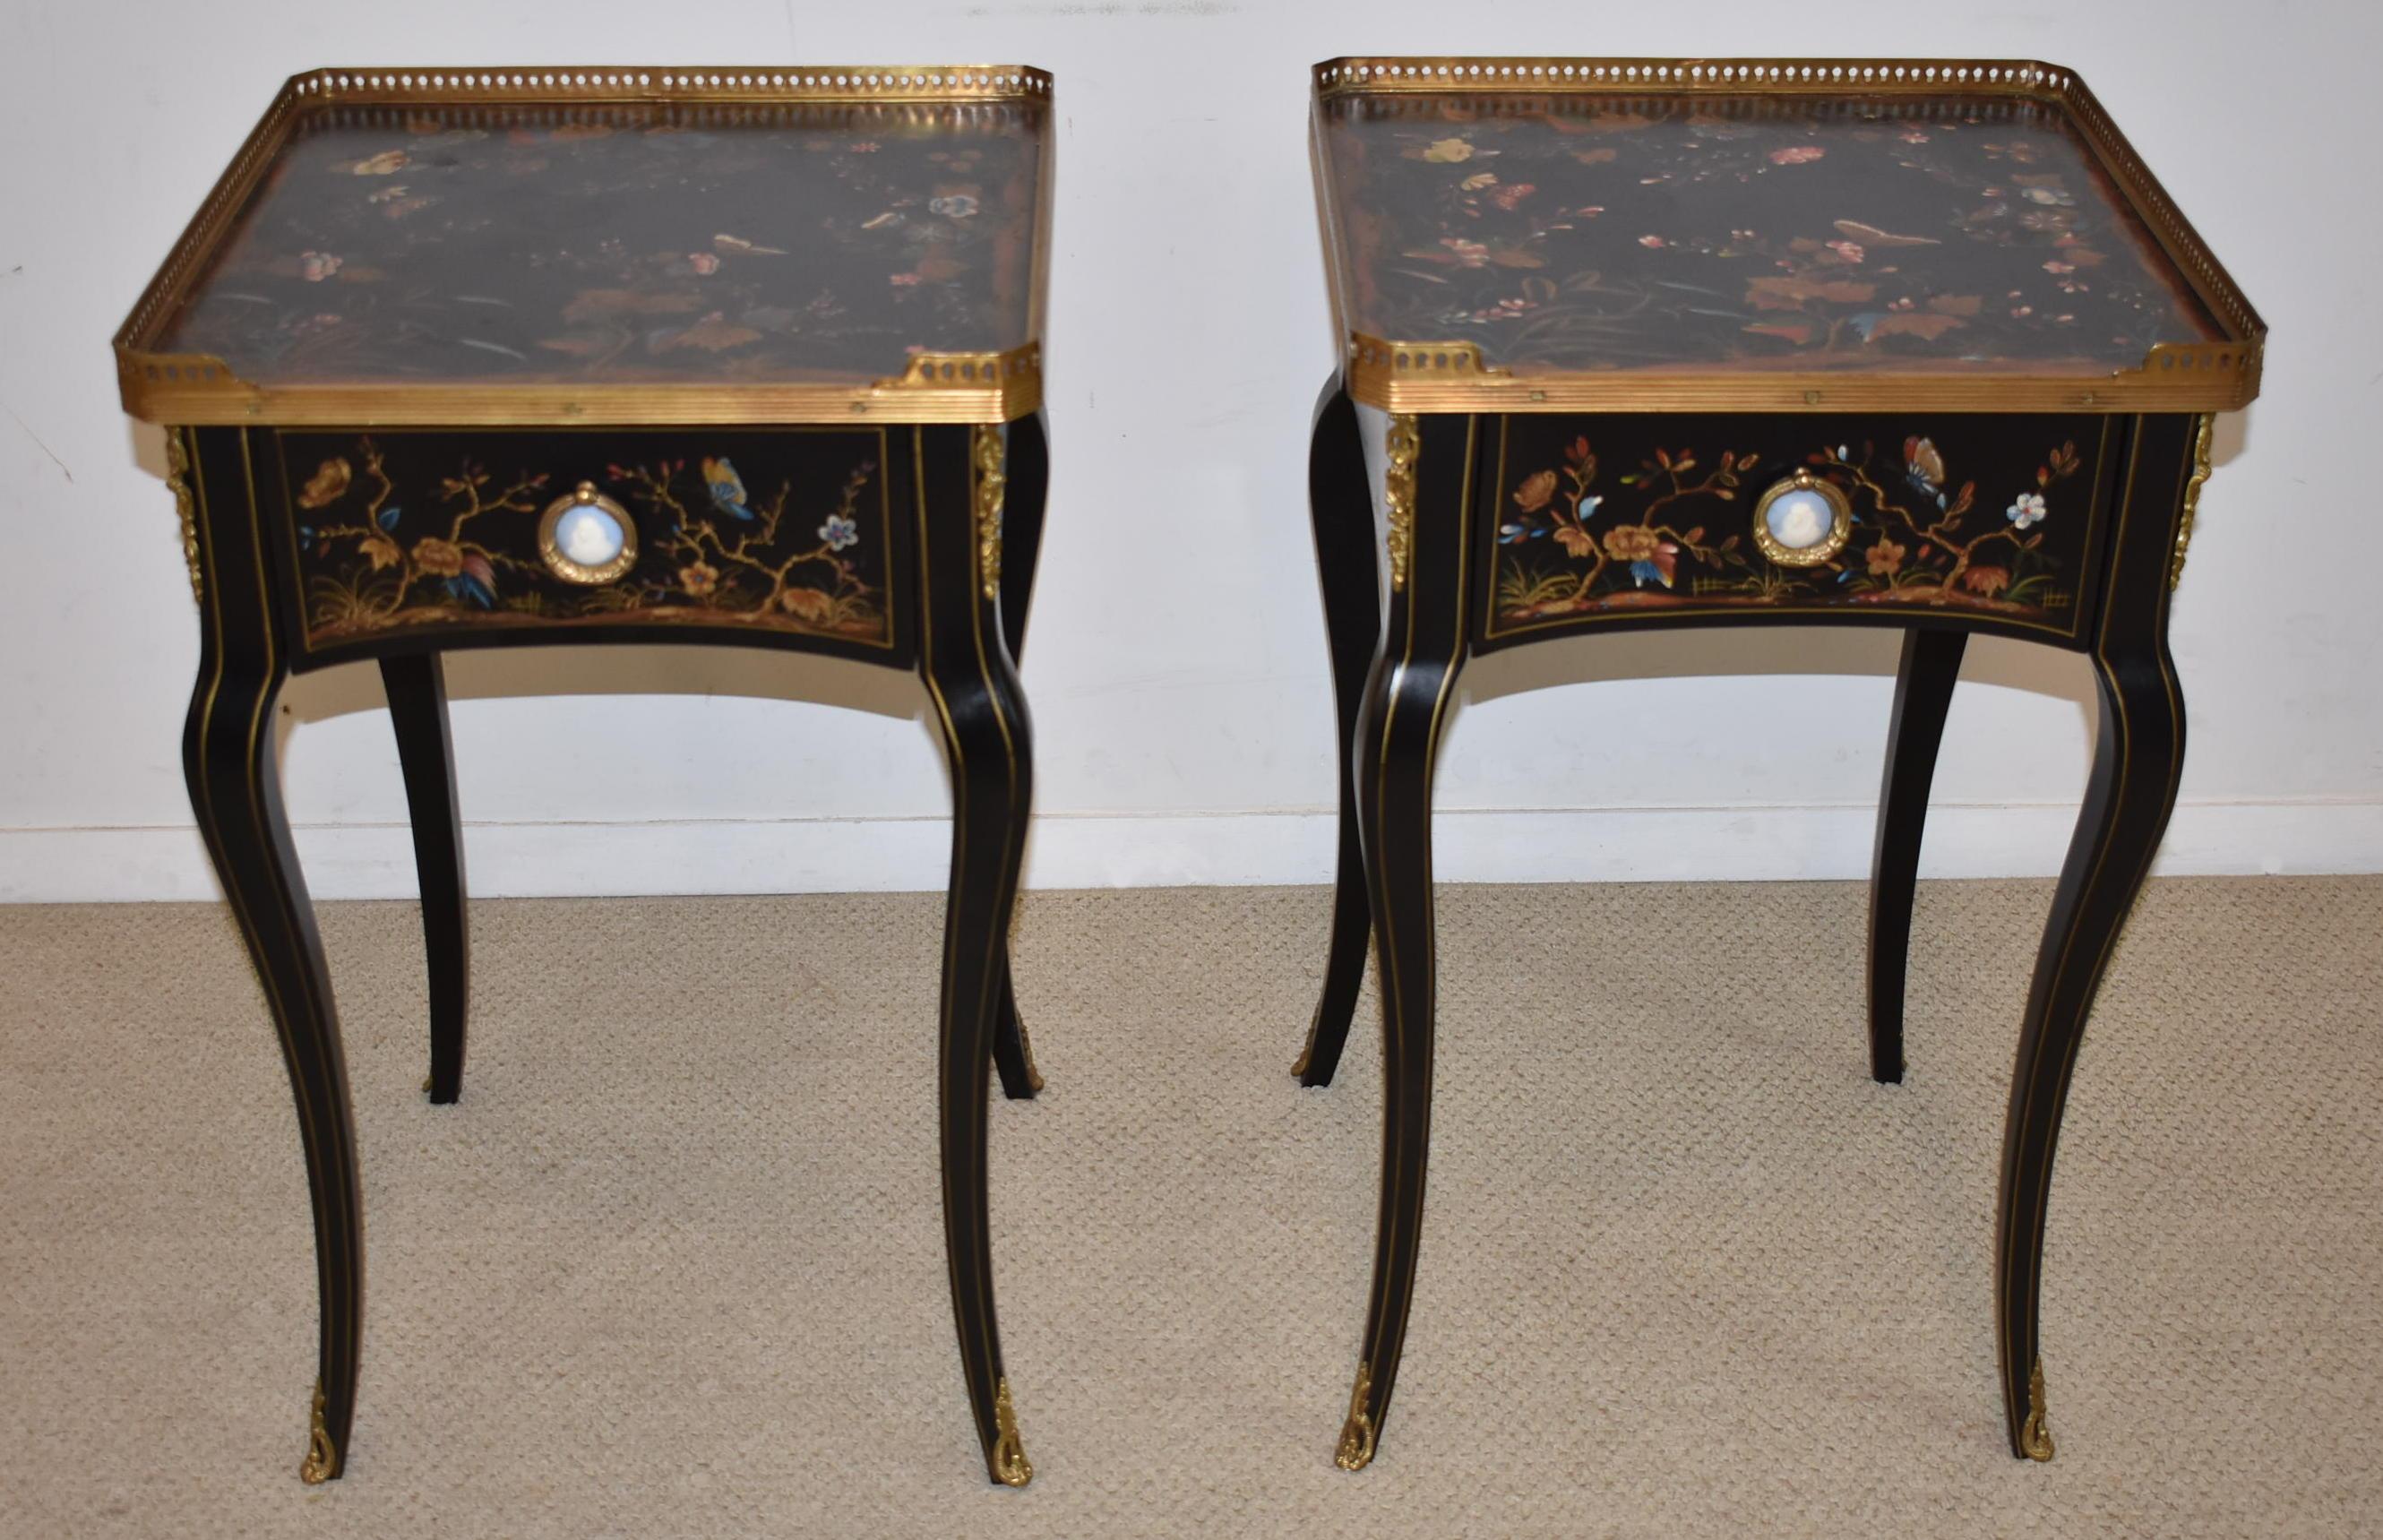 Pair of Theodore Alexander black lacquered side tables. French Empire style with hand painted Asian themed designs of flowers and butterflies. Brass gallery and mounts. Wedgwood medallion with heavy cast wreath form loop handle.